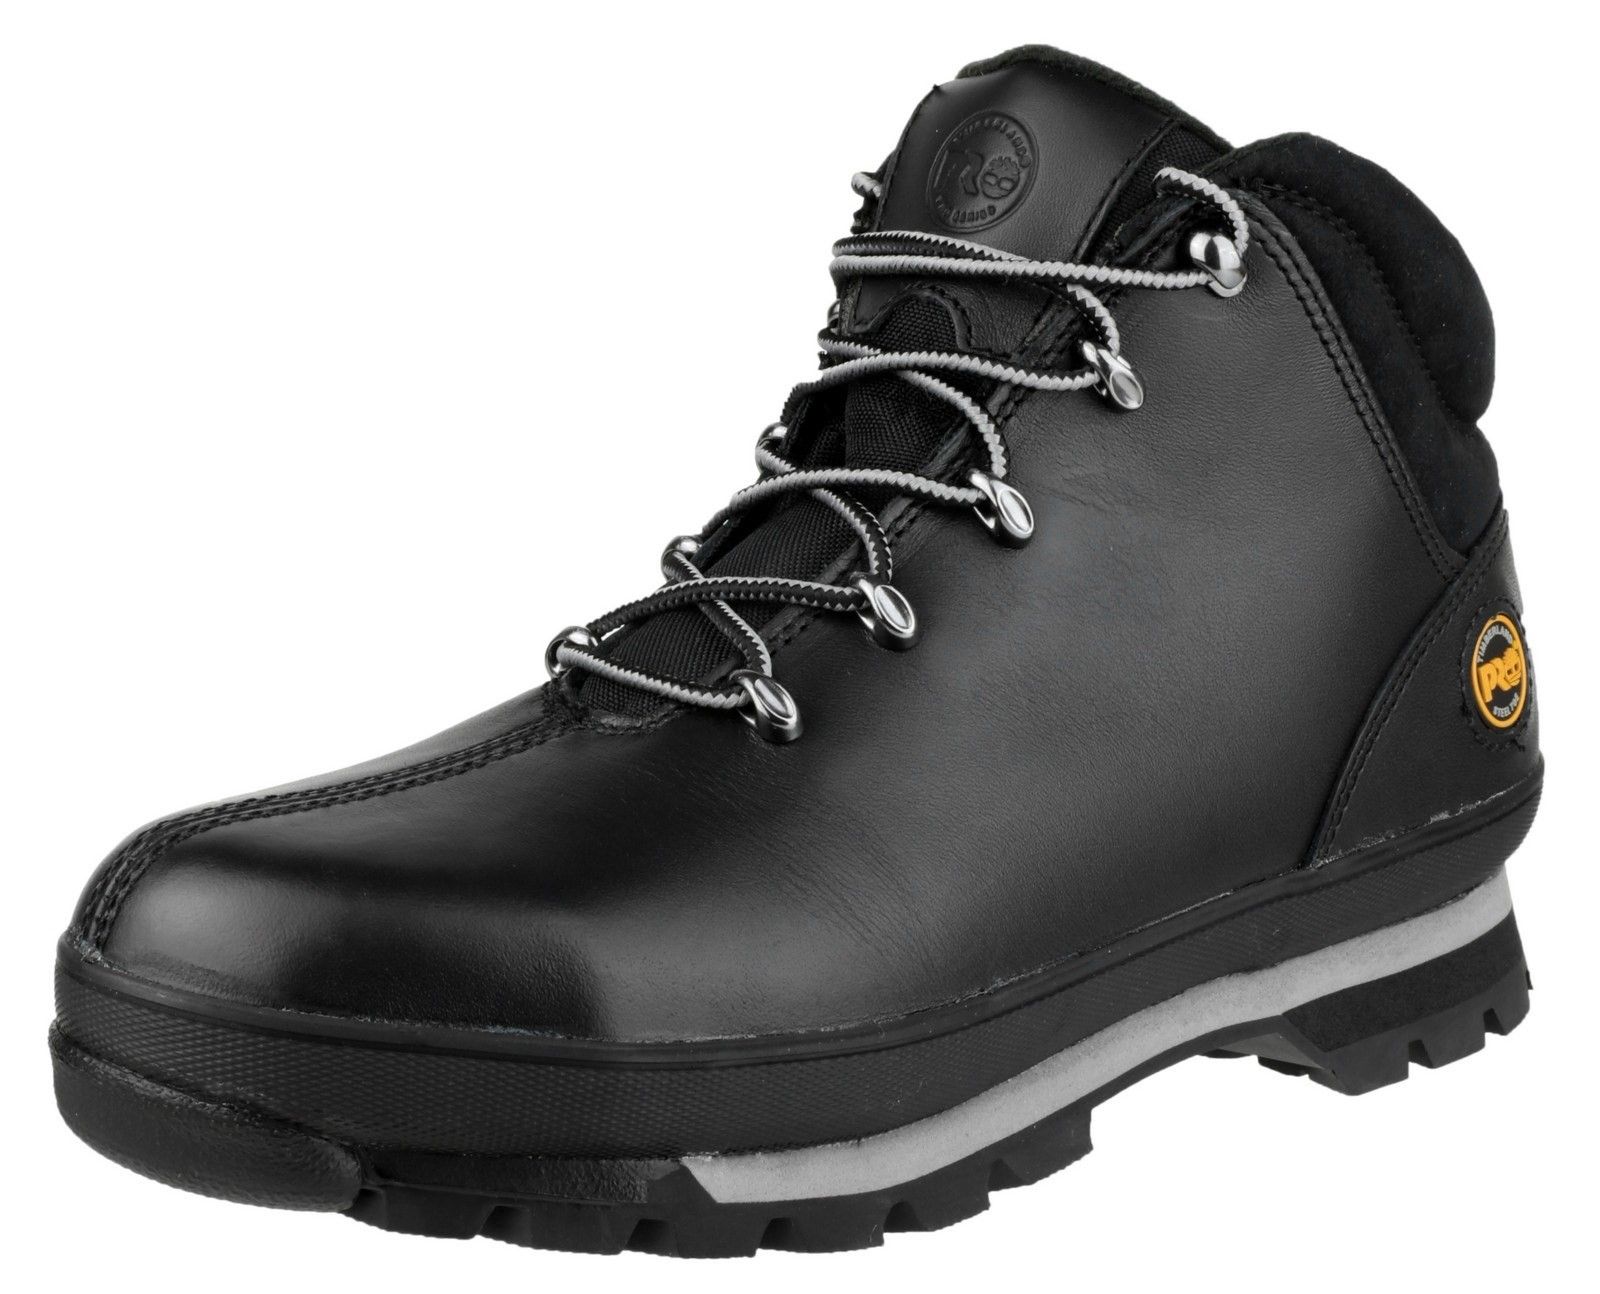 The Timberland PRO Splitrock series offers the best in craftsmanship, safety and classic styling. Featuring rugged materials, durable protection and slip-resistant outsoles for superior performance. Excel on the jobsite with Timberland PRO.Impact and compression resistant toe cap. 
Anti-static with an energy absorbing heel. 
Water resistant premium full grain leather upper. 
Penetration resistant midsole for flexible underfoot protection. 
High heat resistant to 300 degrees.